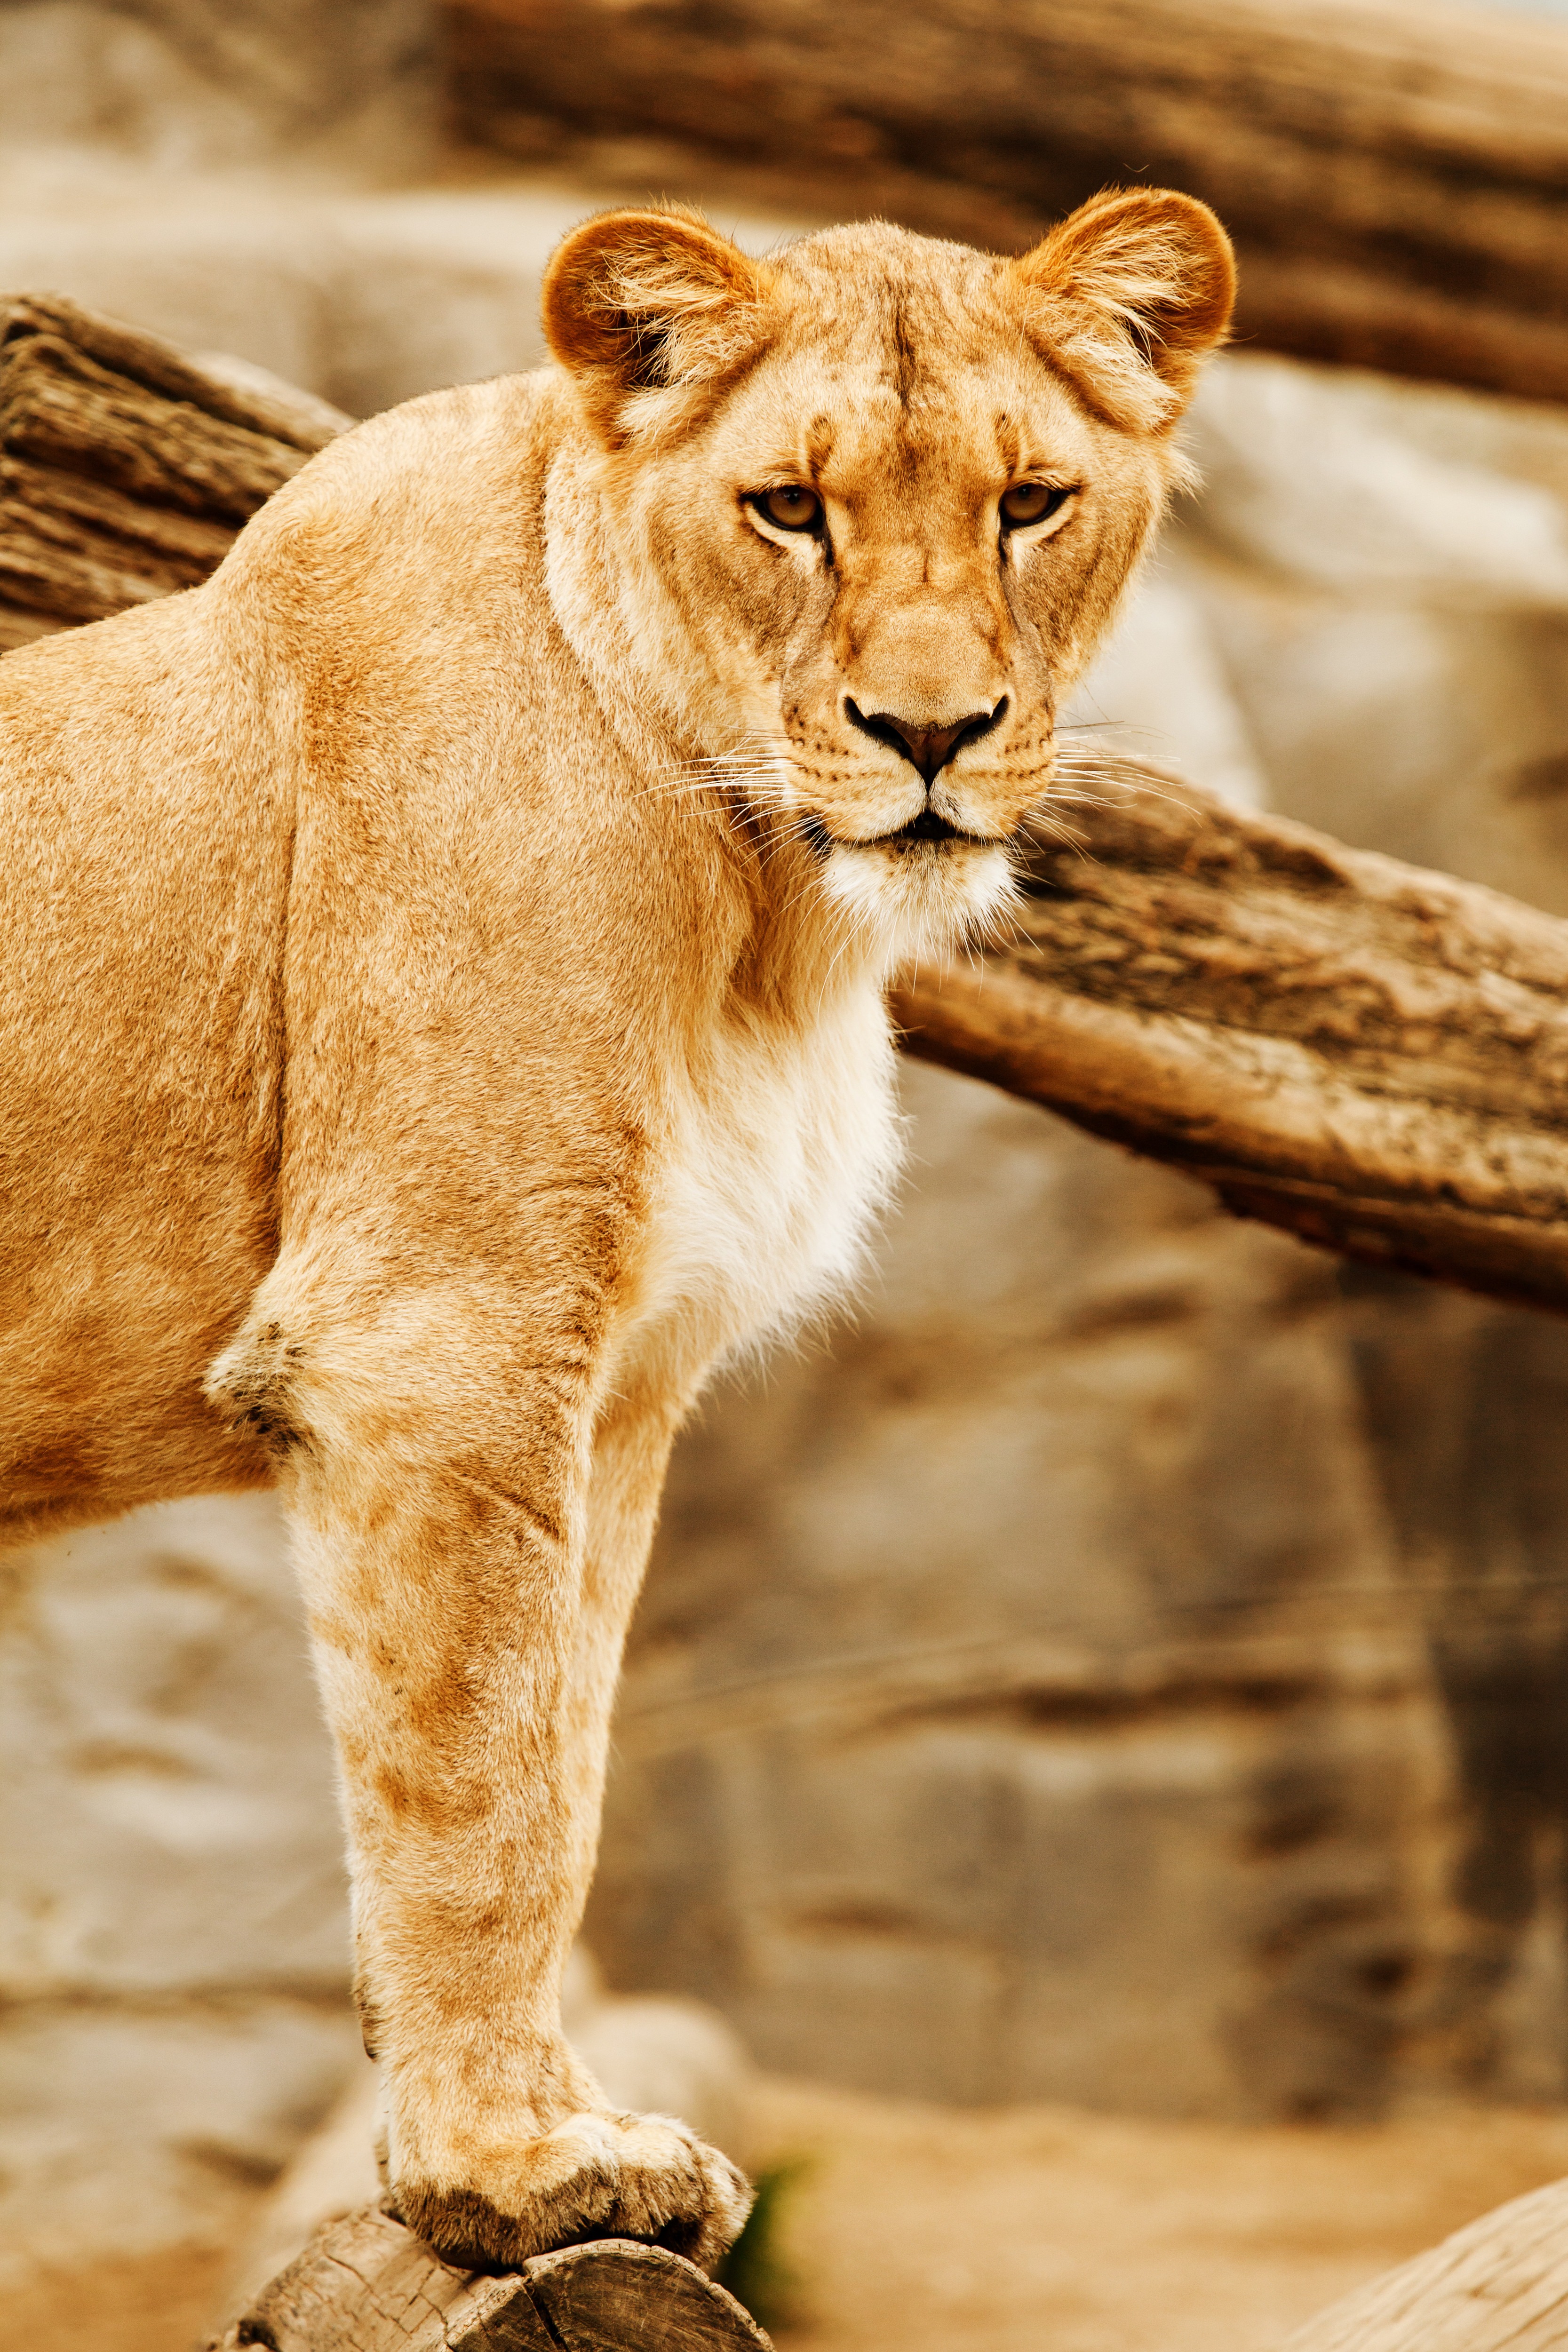 Lioness In Africa, Africa, Animal, Jungle, Lioness, HQ Photo